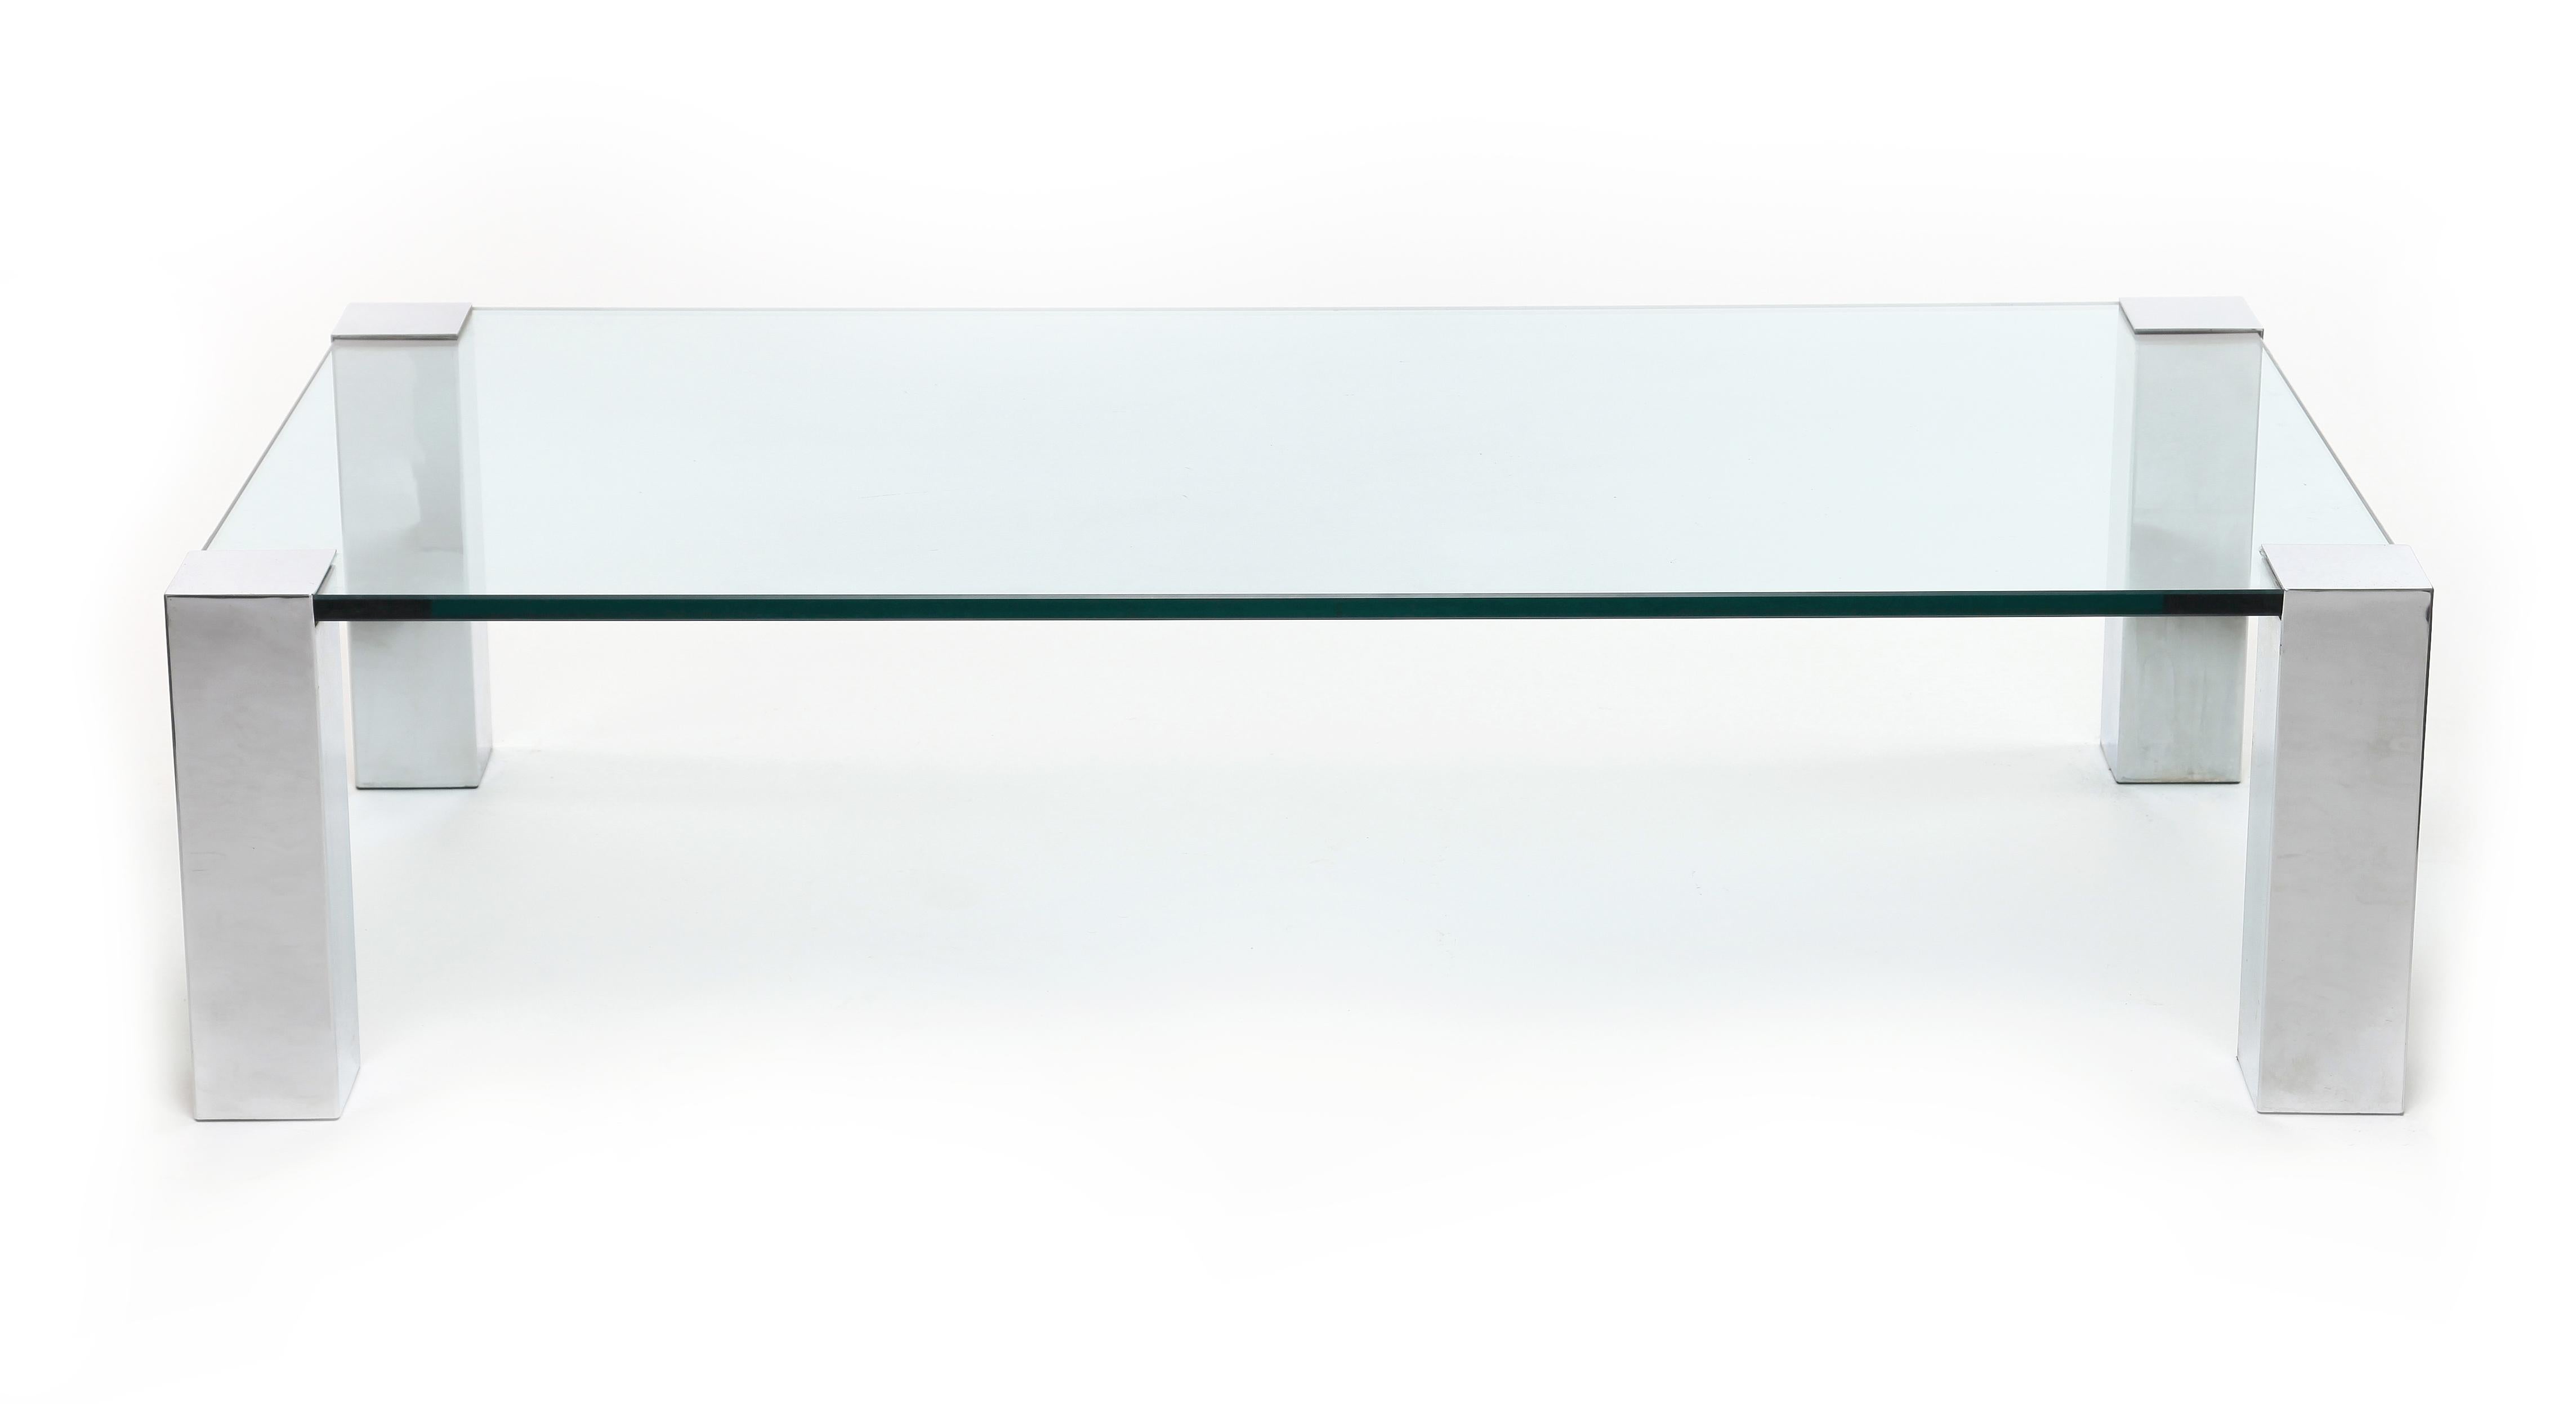 1970s coffee table in glass and chrome attributed to Willy Rizzo for Cidue Italy.

Willy Rizzo's furniture design channelled the sophistication of Mies van der Rohe and Le Corbusier, his pieces combining clean, simple lines with bold geometric